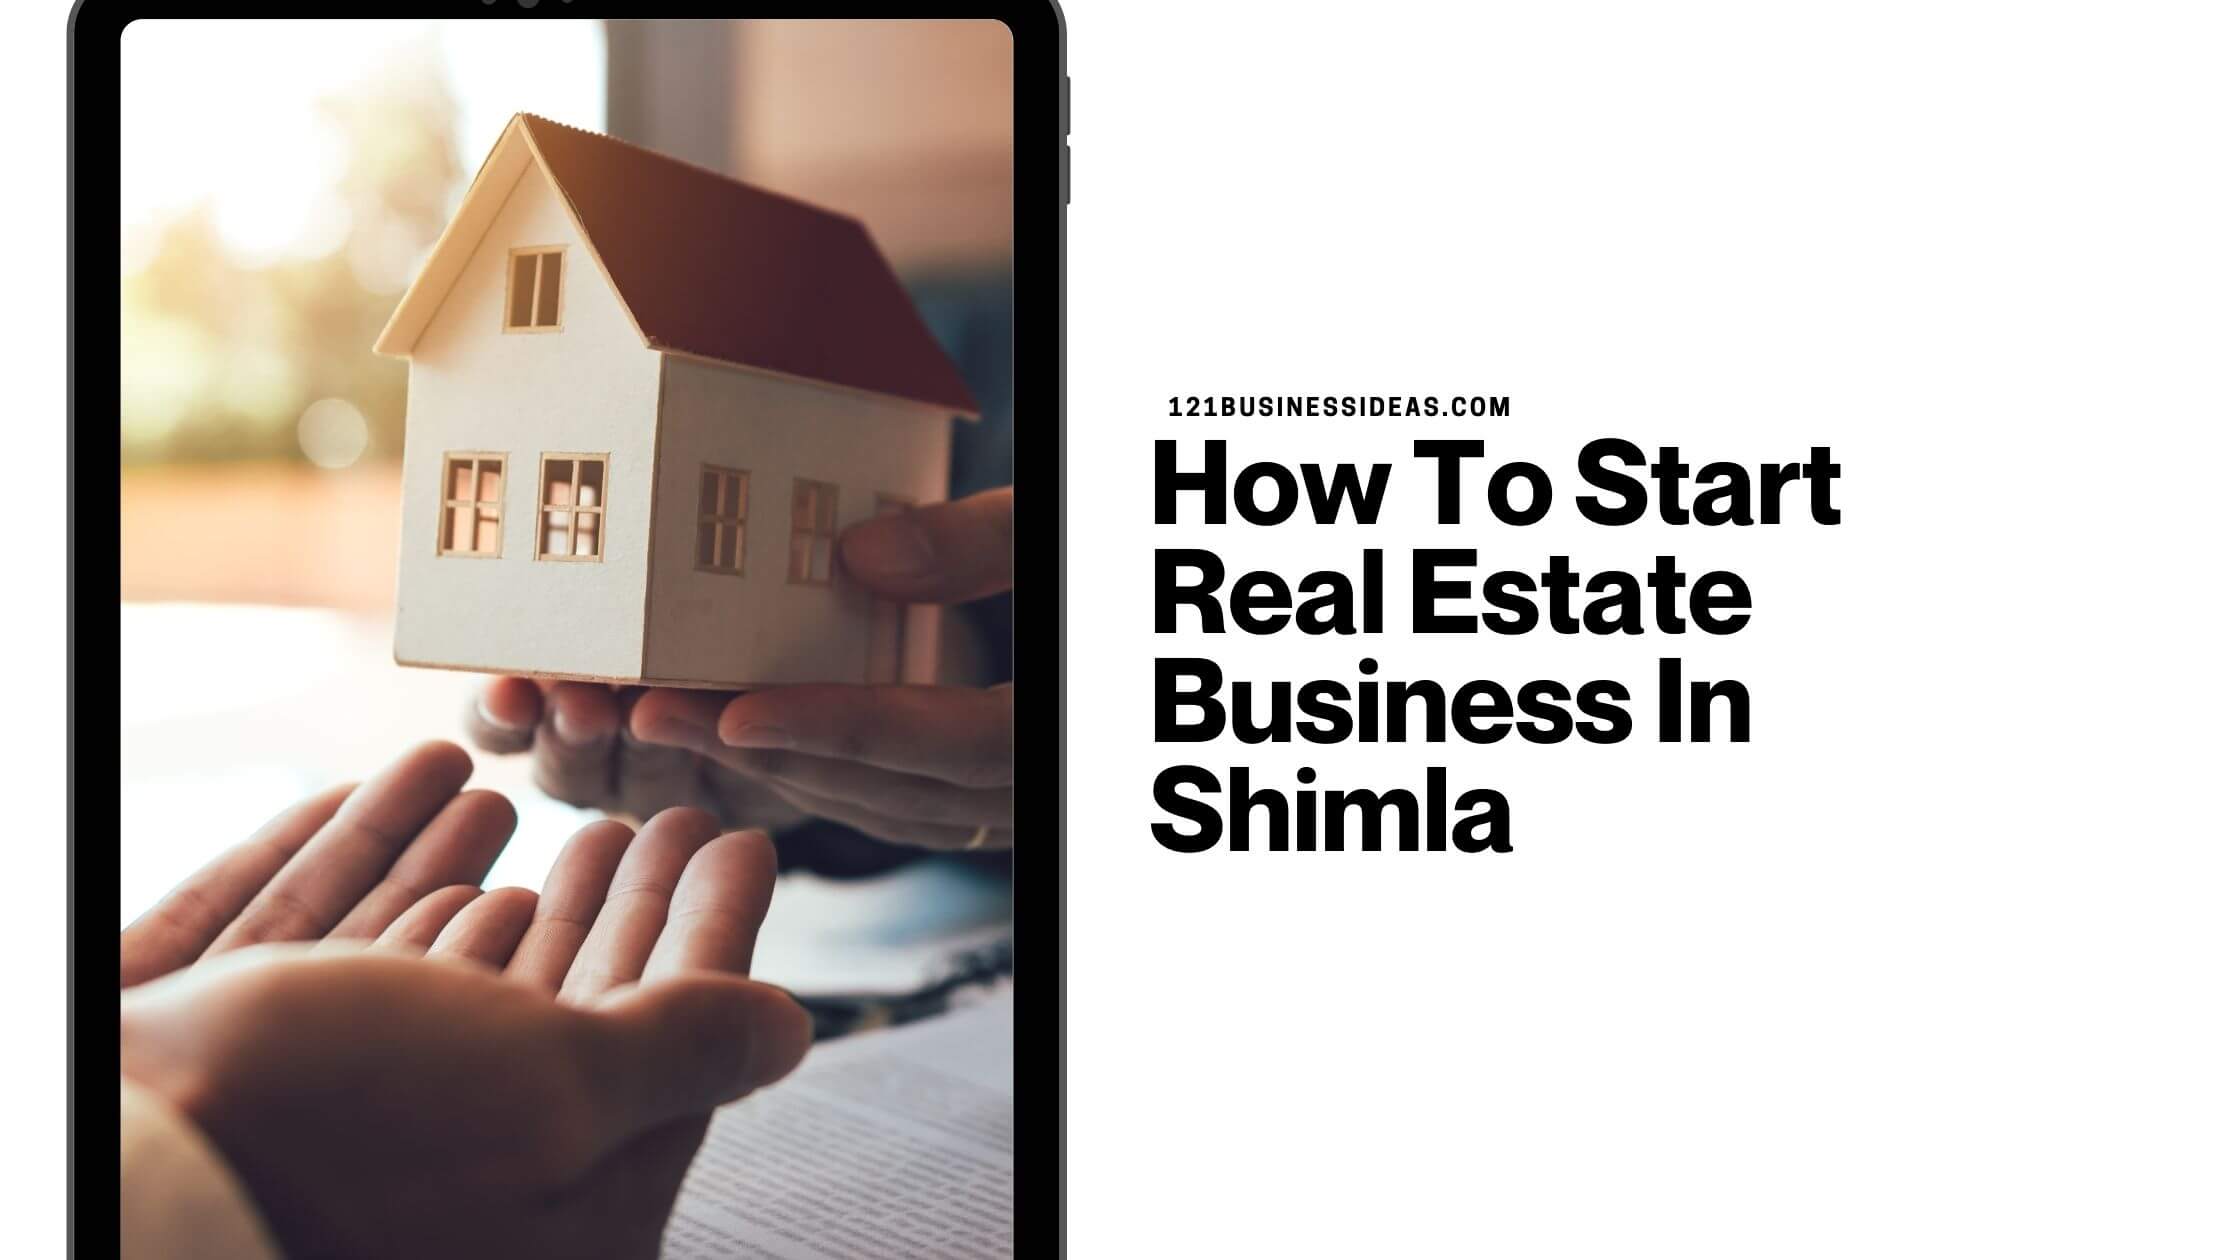 How To Start Real Estate Business In Shimla (1)